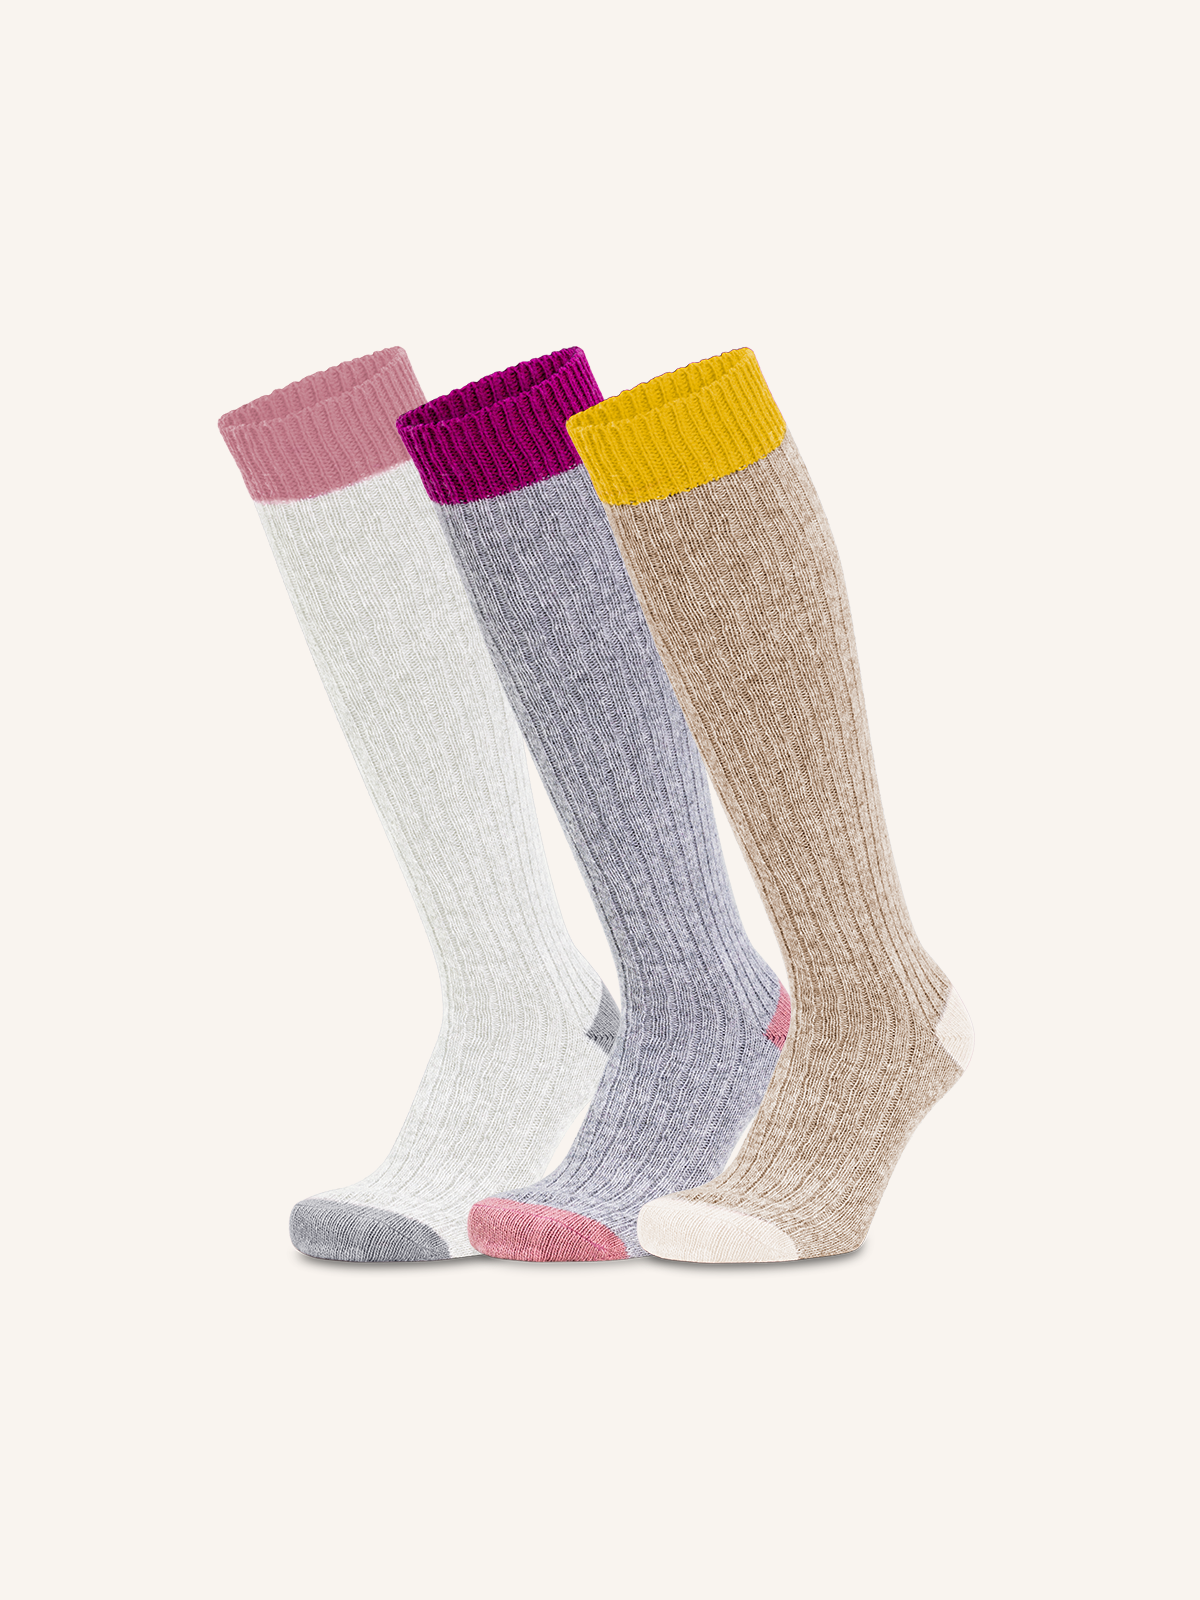 Long Ribbed Socks in Cashmere and Wool Blend for Women | Plain Color | Pack of 3 pairs | Cachelife DL